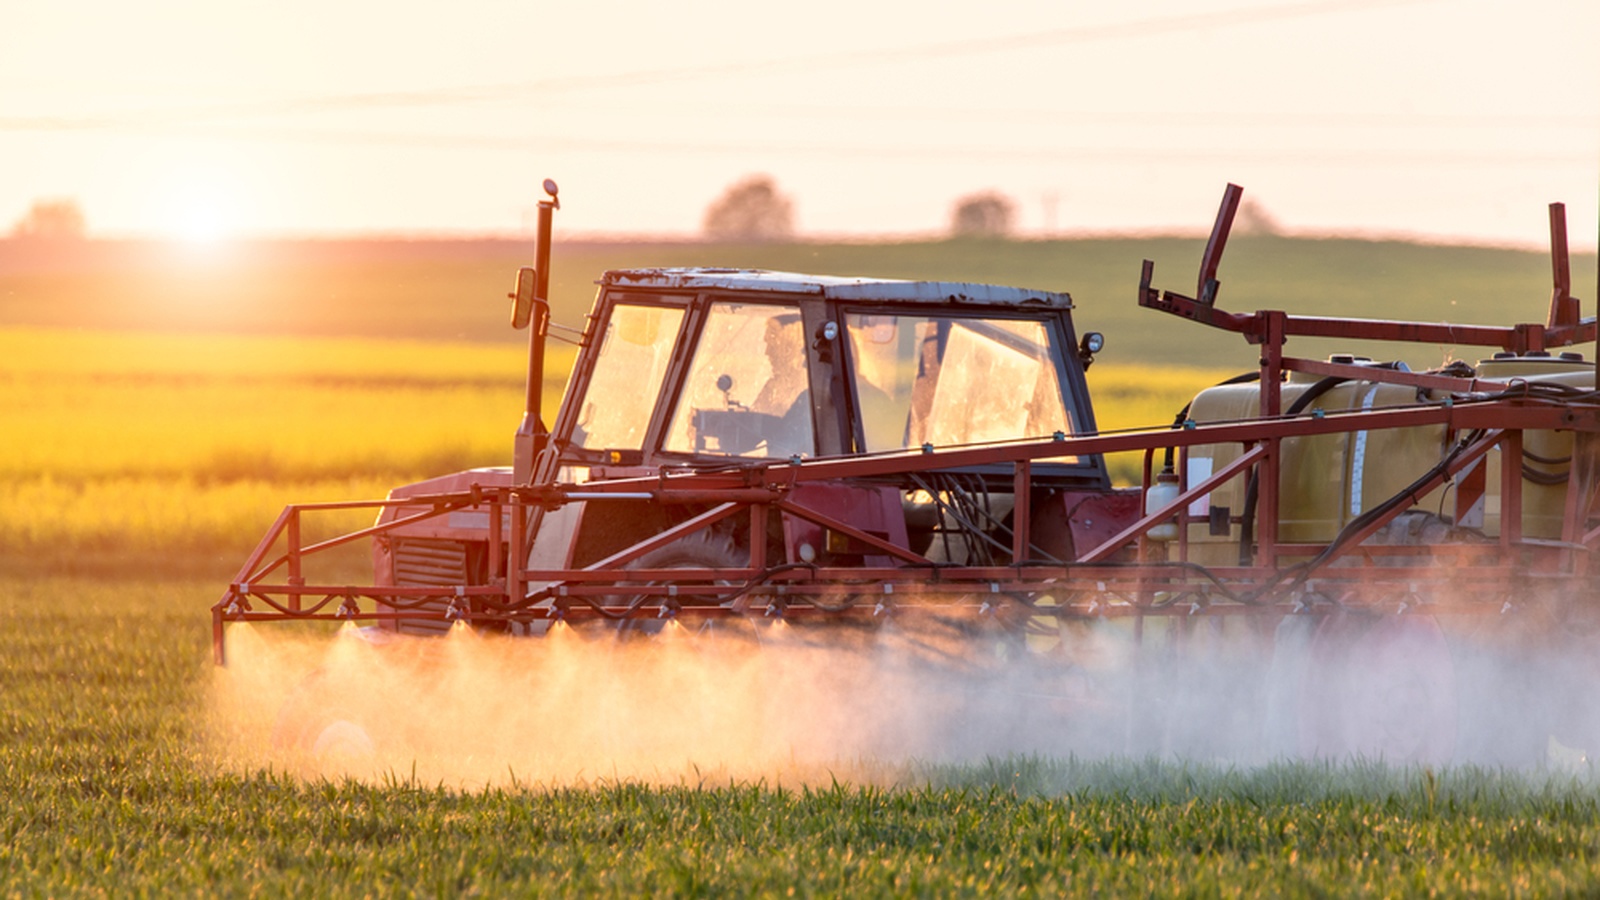 What Is ‘Roundup’ Doing To Your Body?